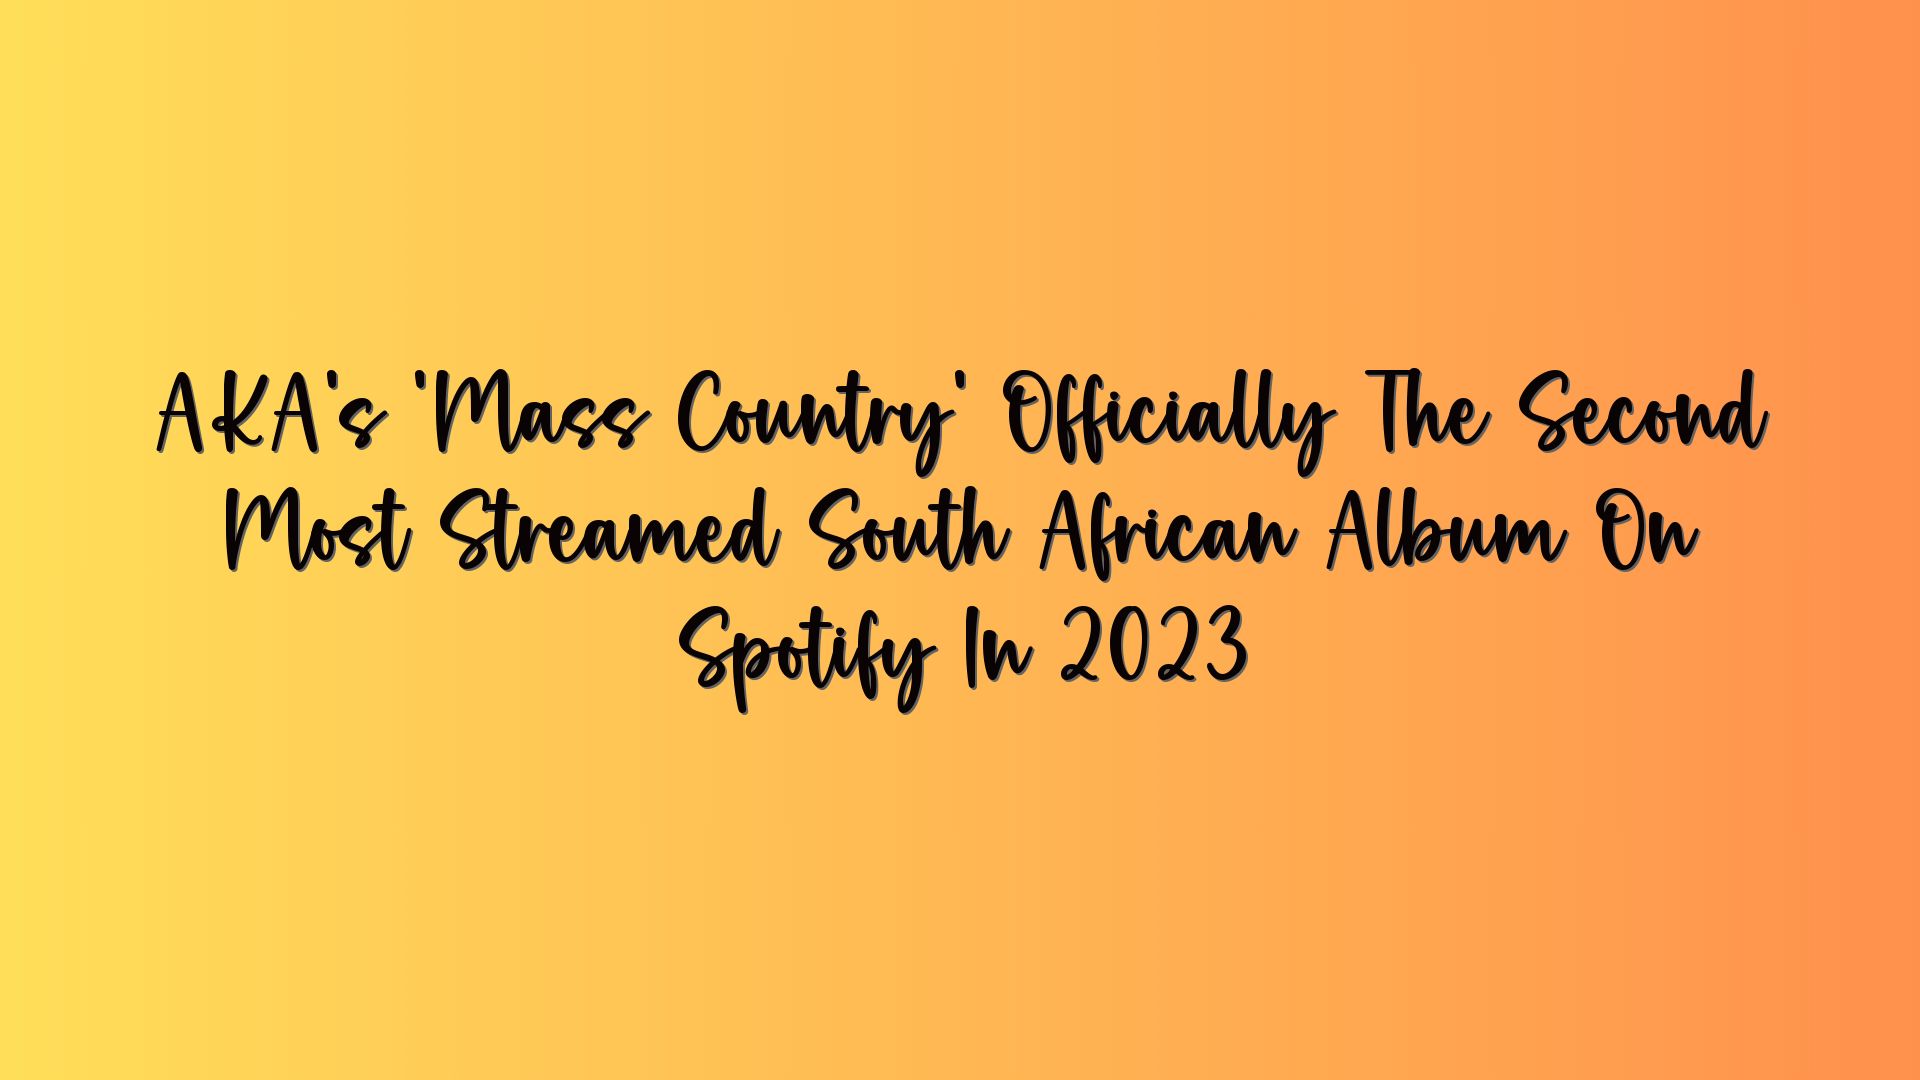 AKA’s ‘Mass Country’ Officially The Second Most Streamed South African Album On Spotify In 2023